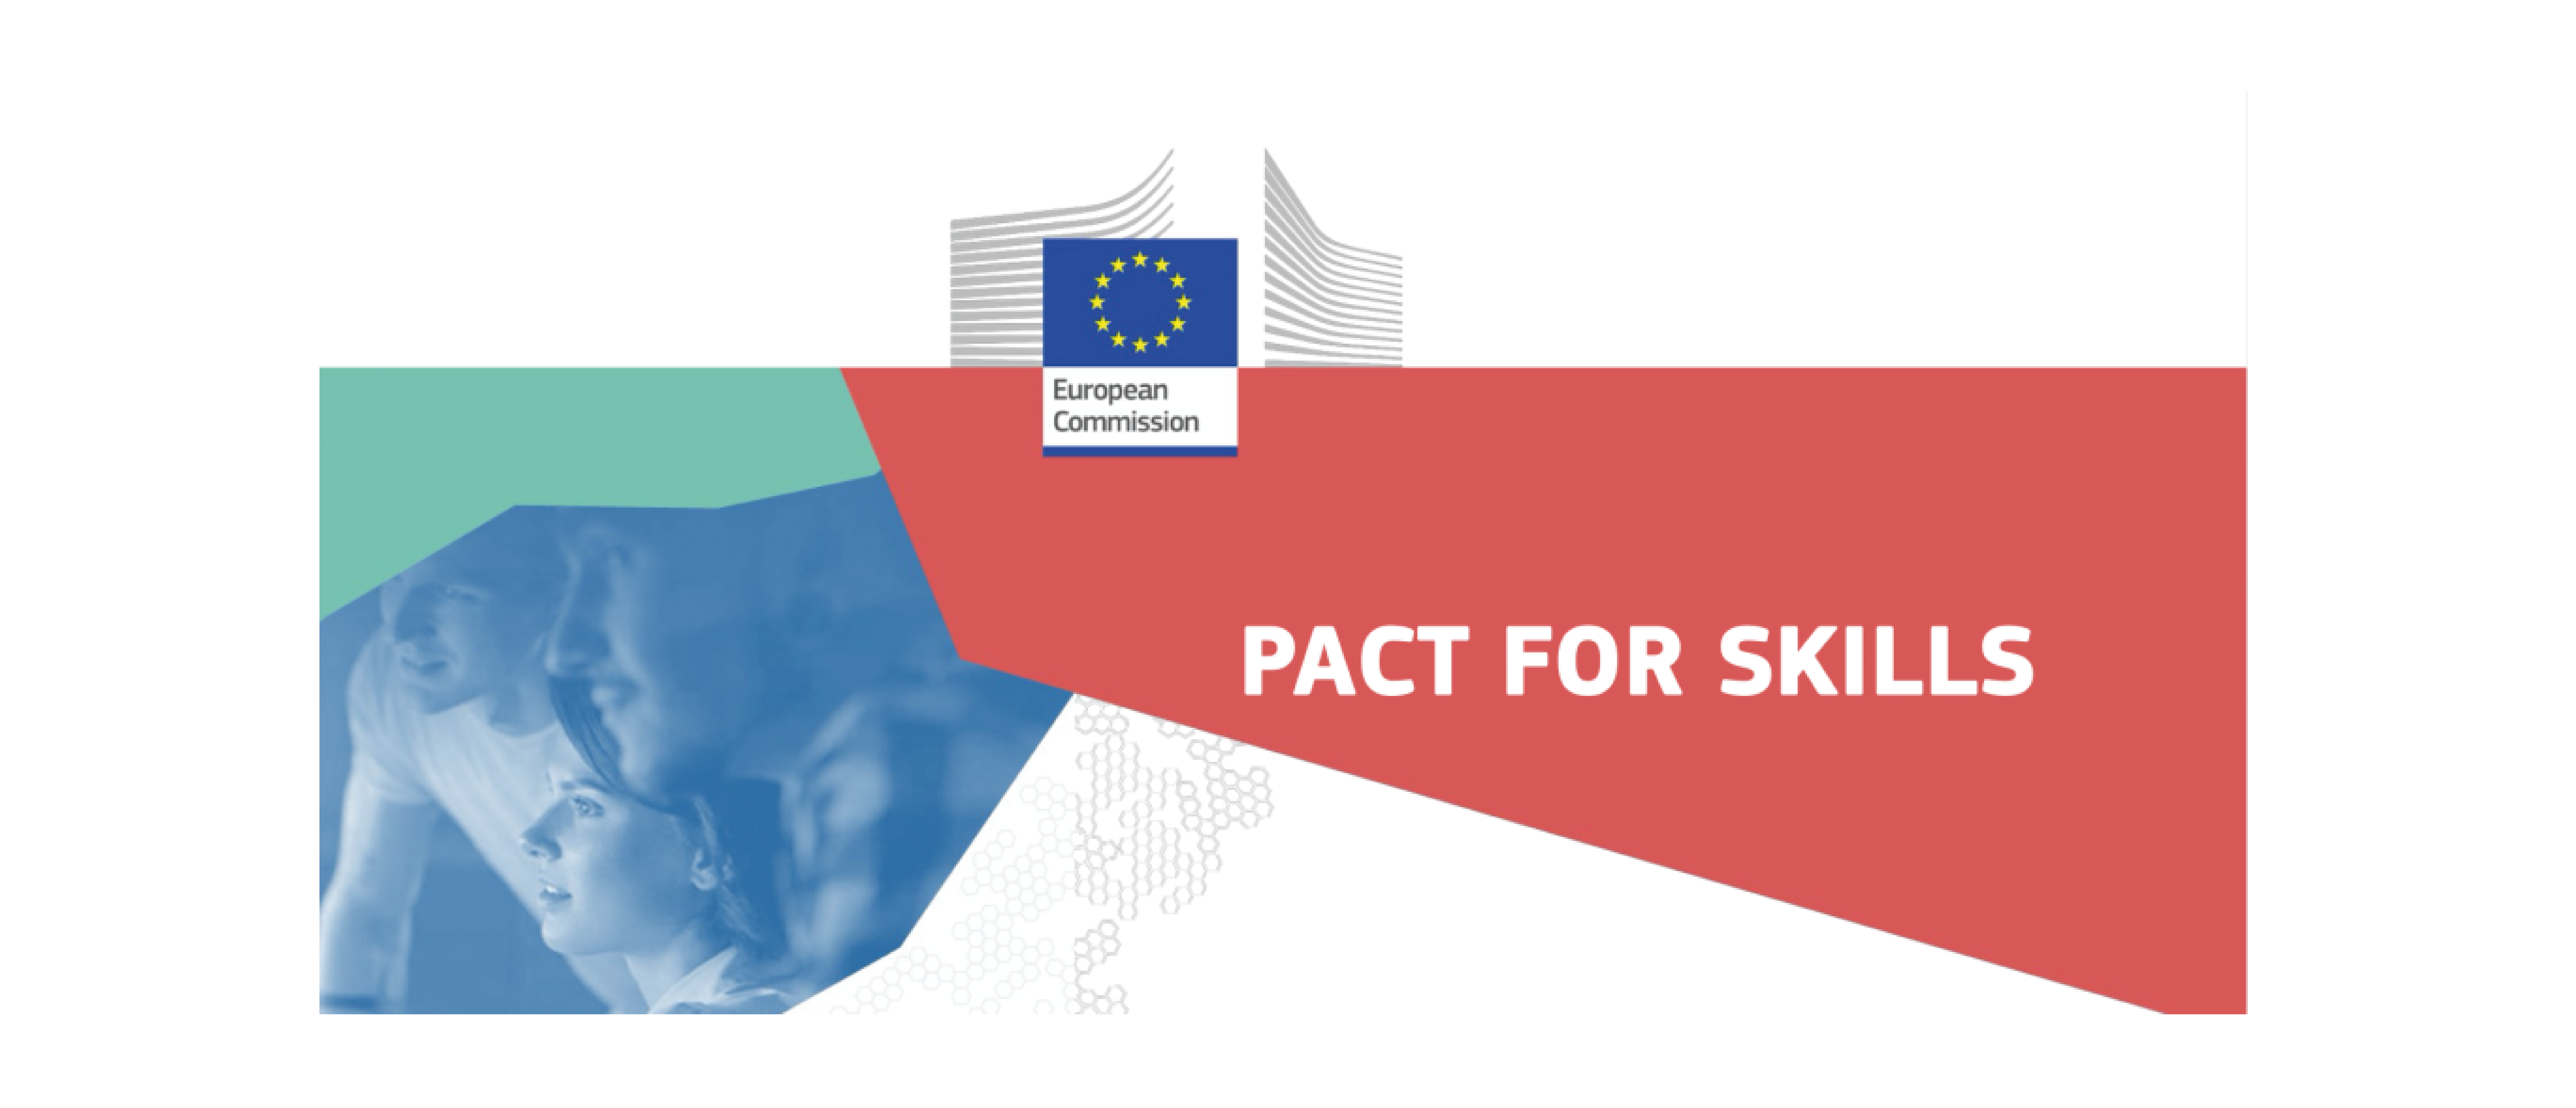 Pact for skills - Home